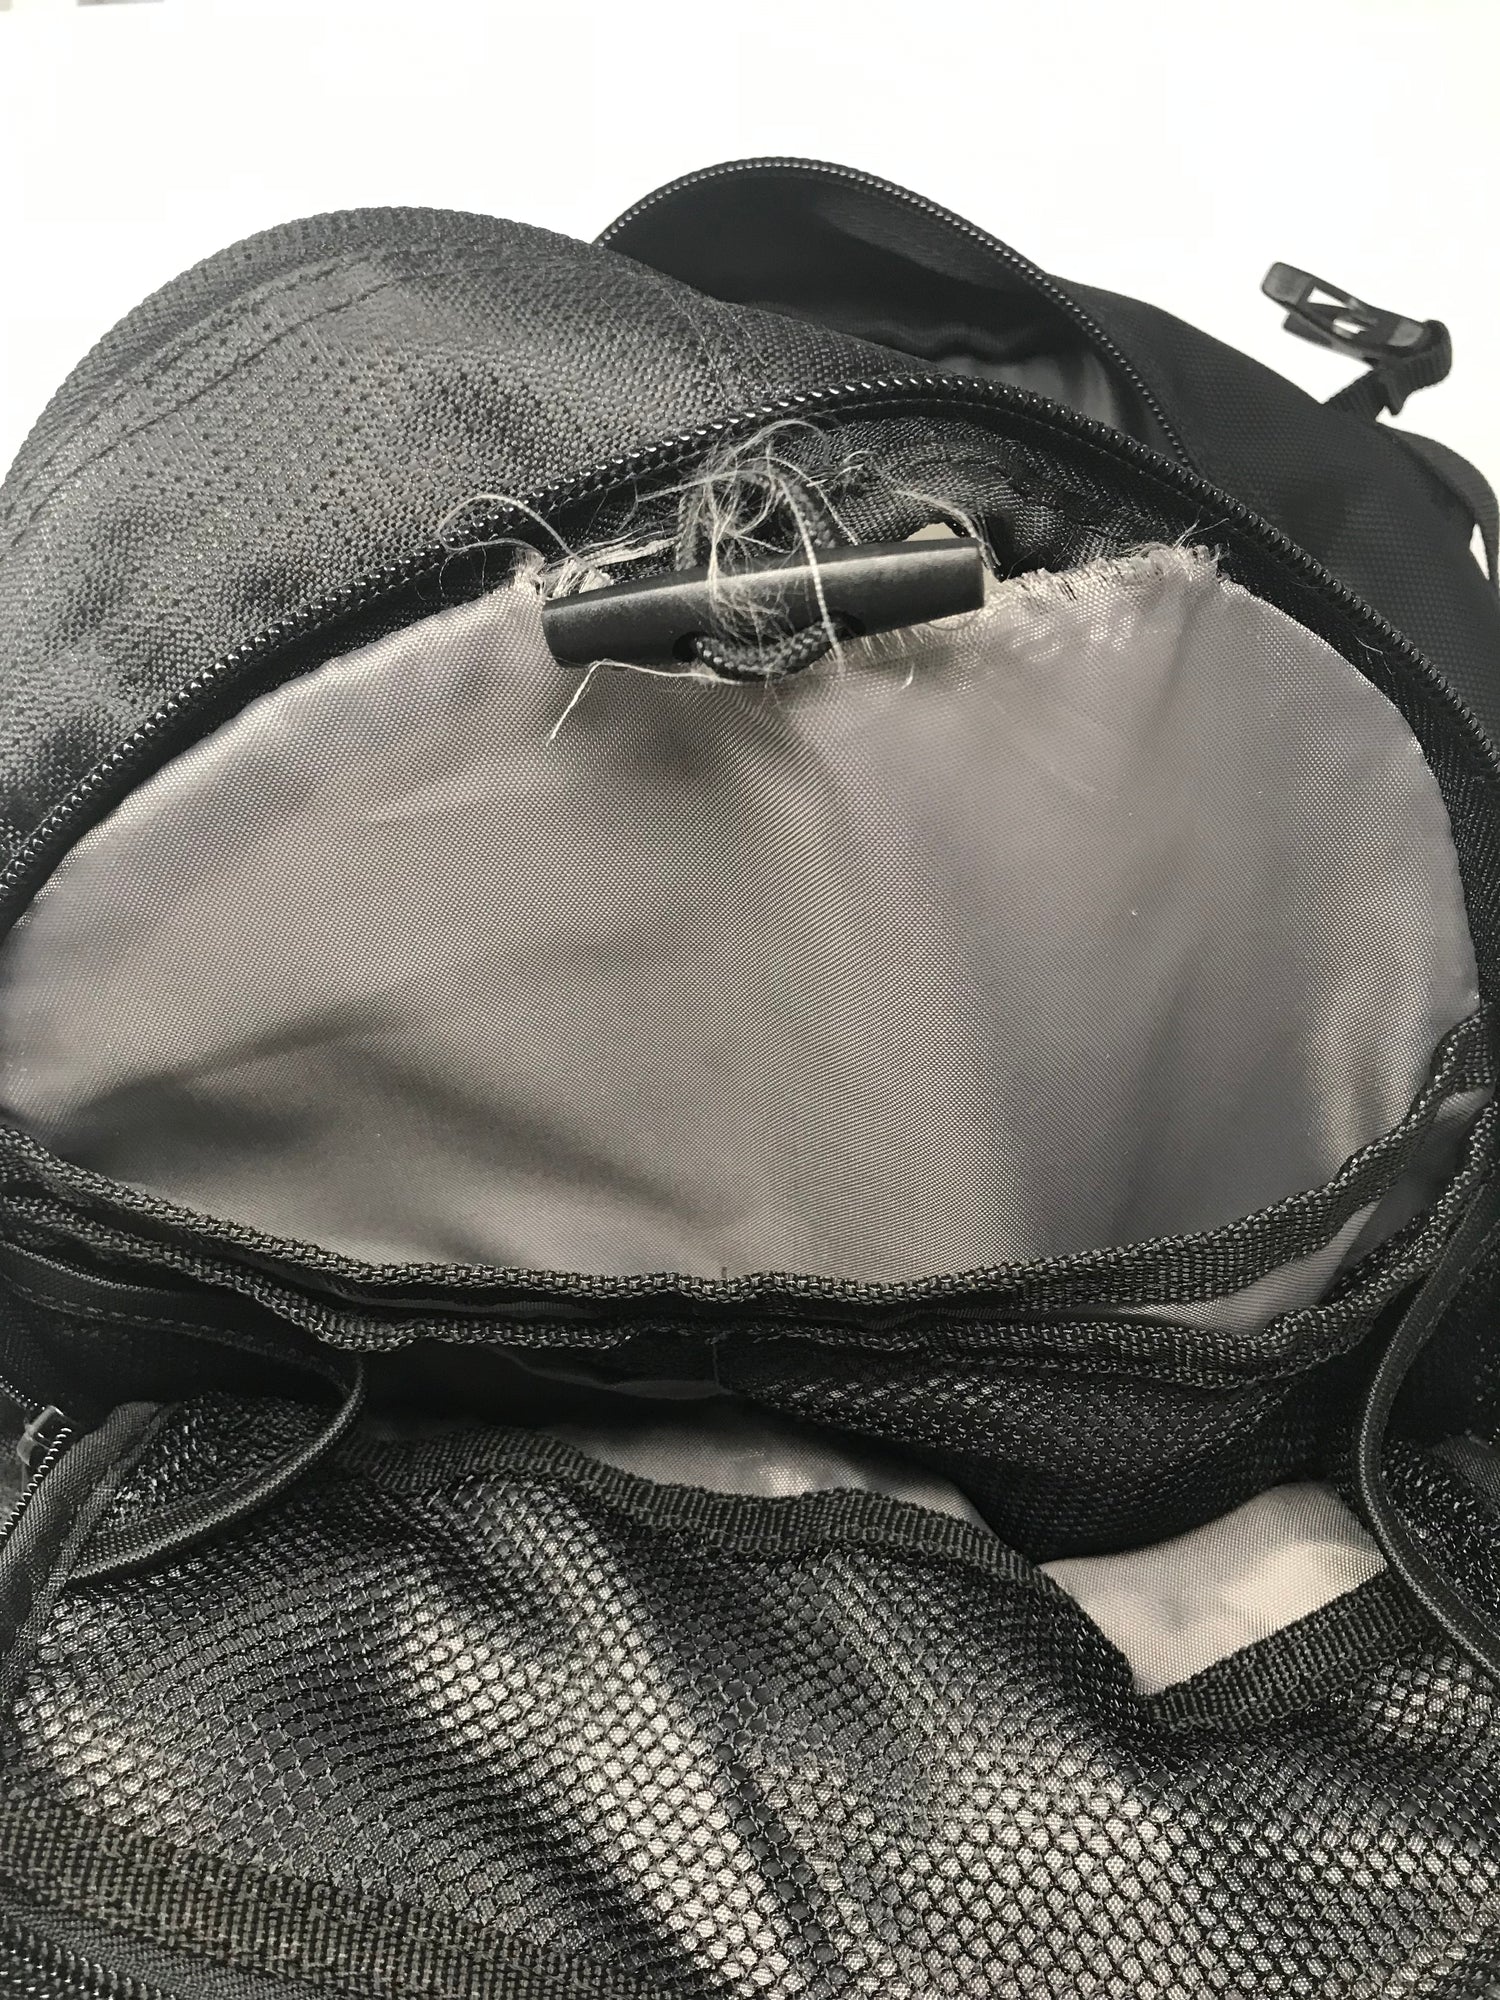 Used Spyder WIre Tackle Back Pack holds up to 3 medium utility